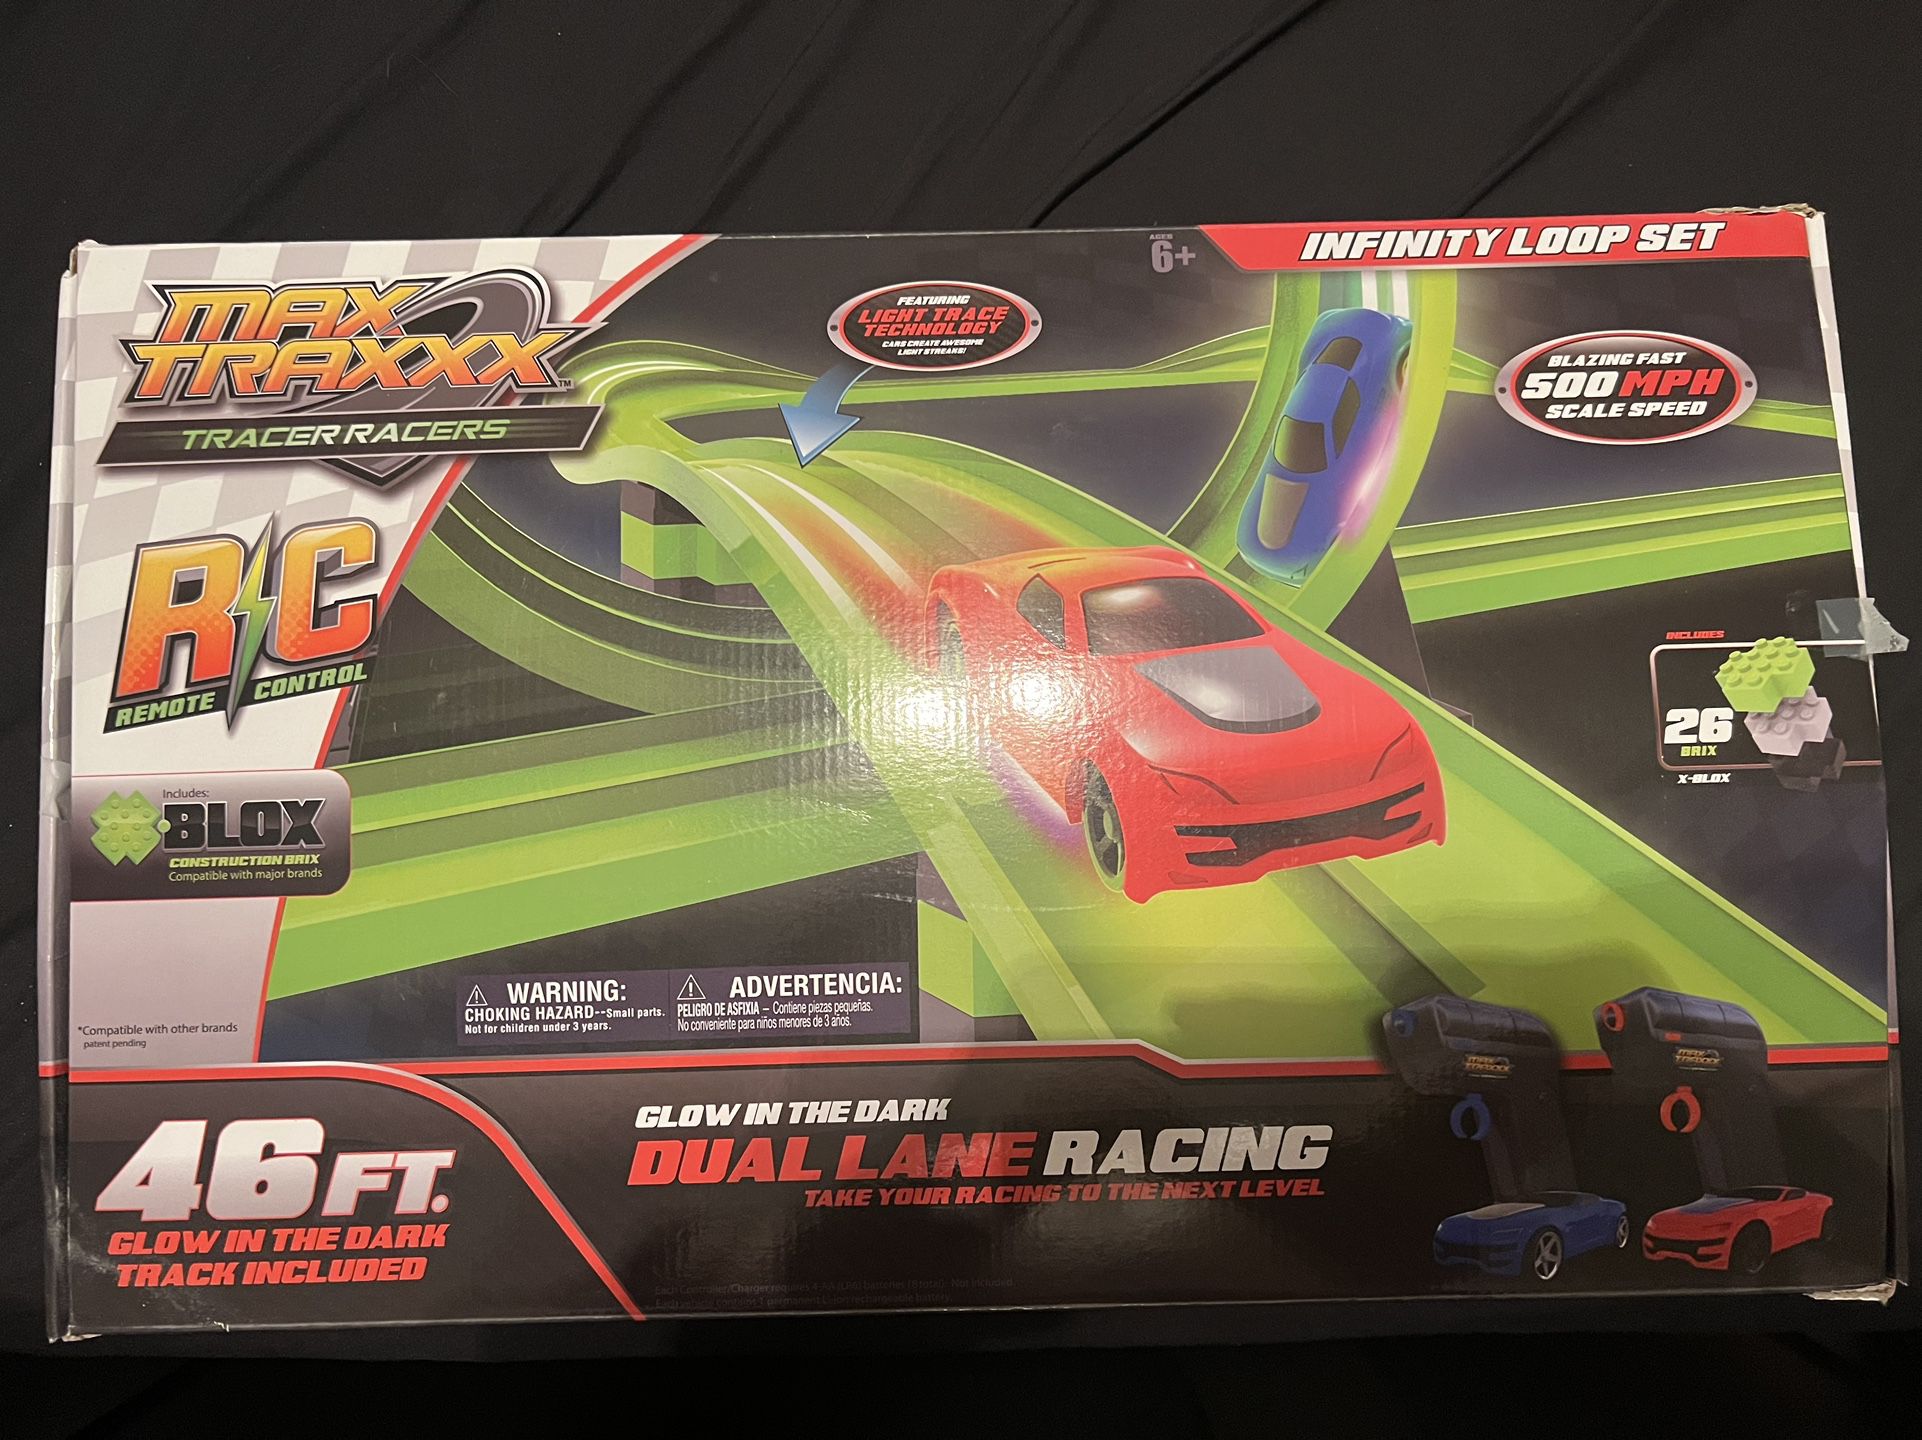 Max traxx Tracer racers In Great used Condition